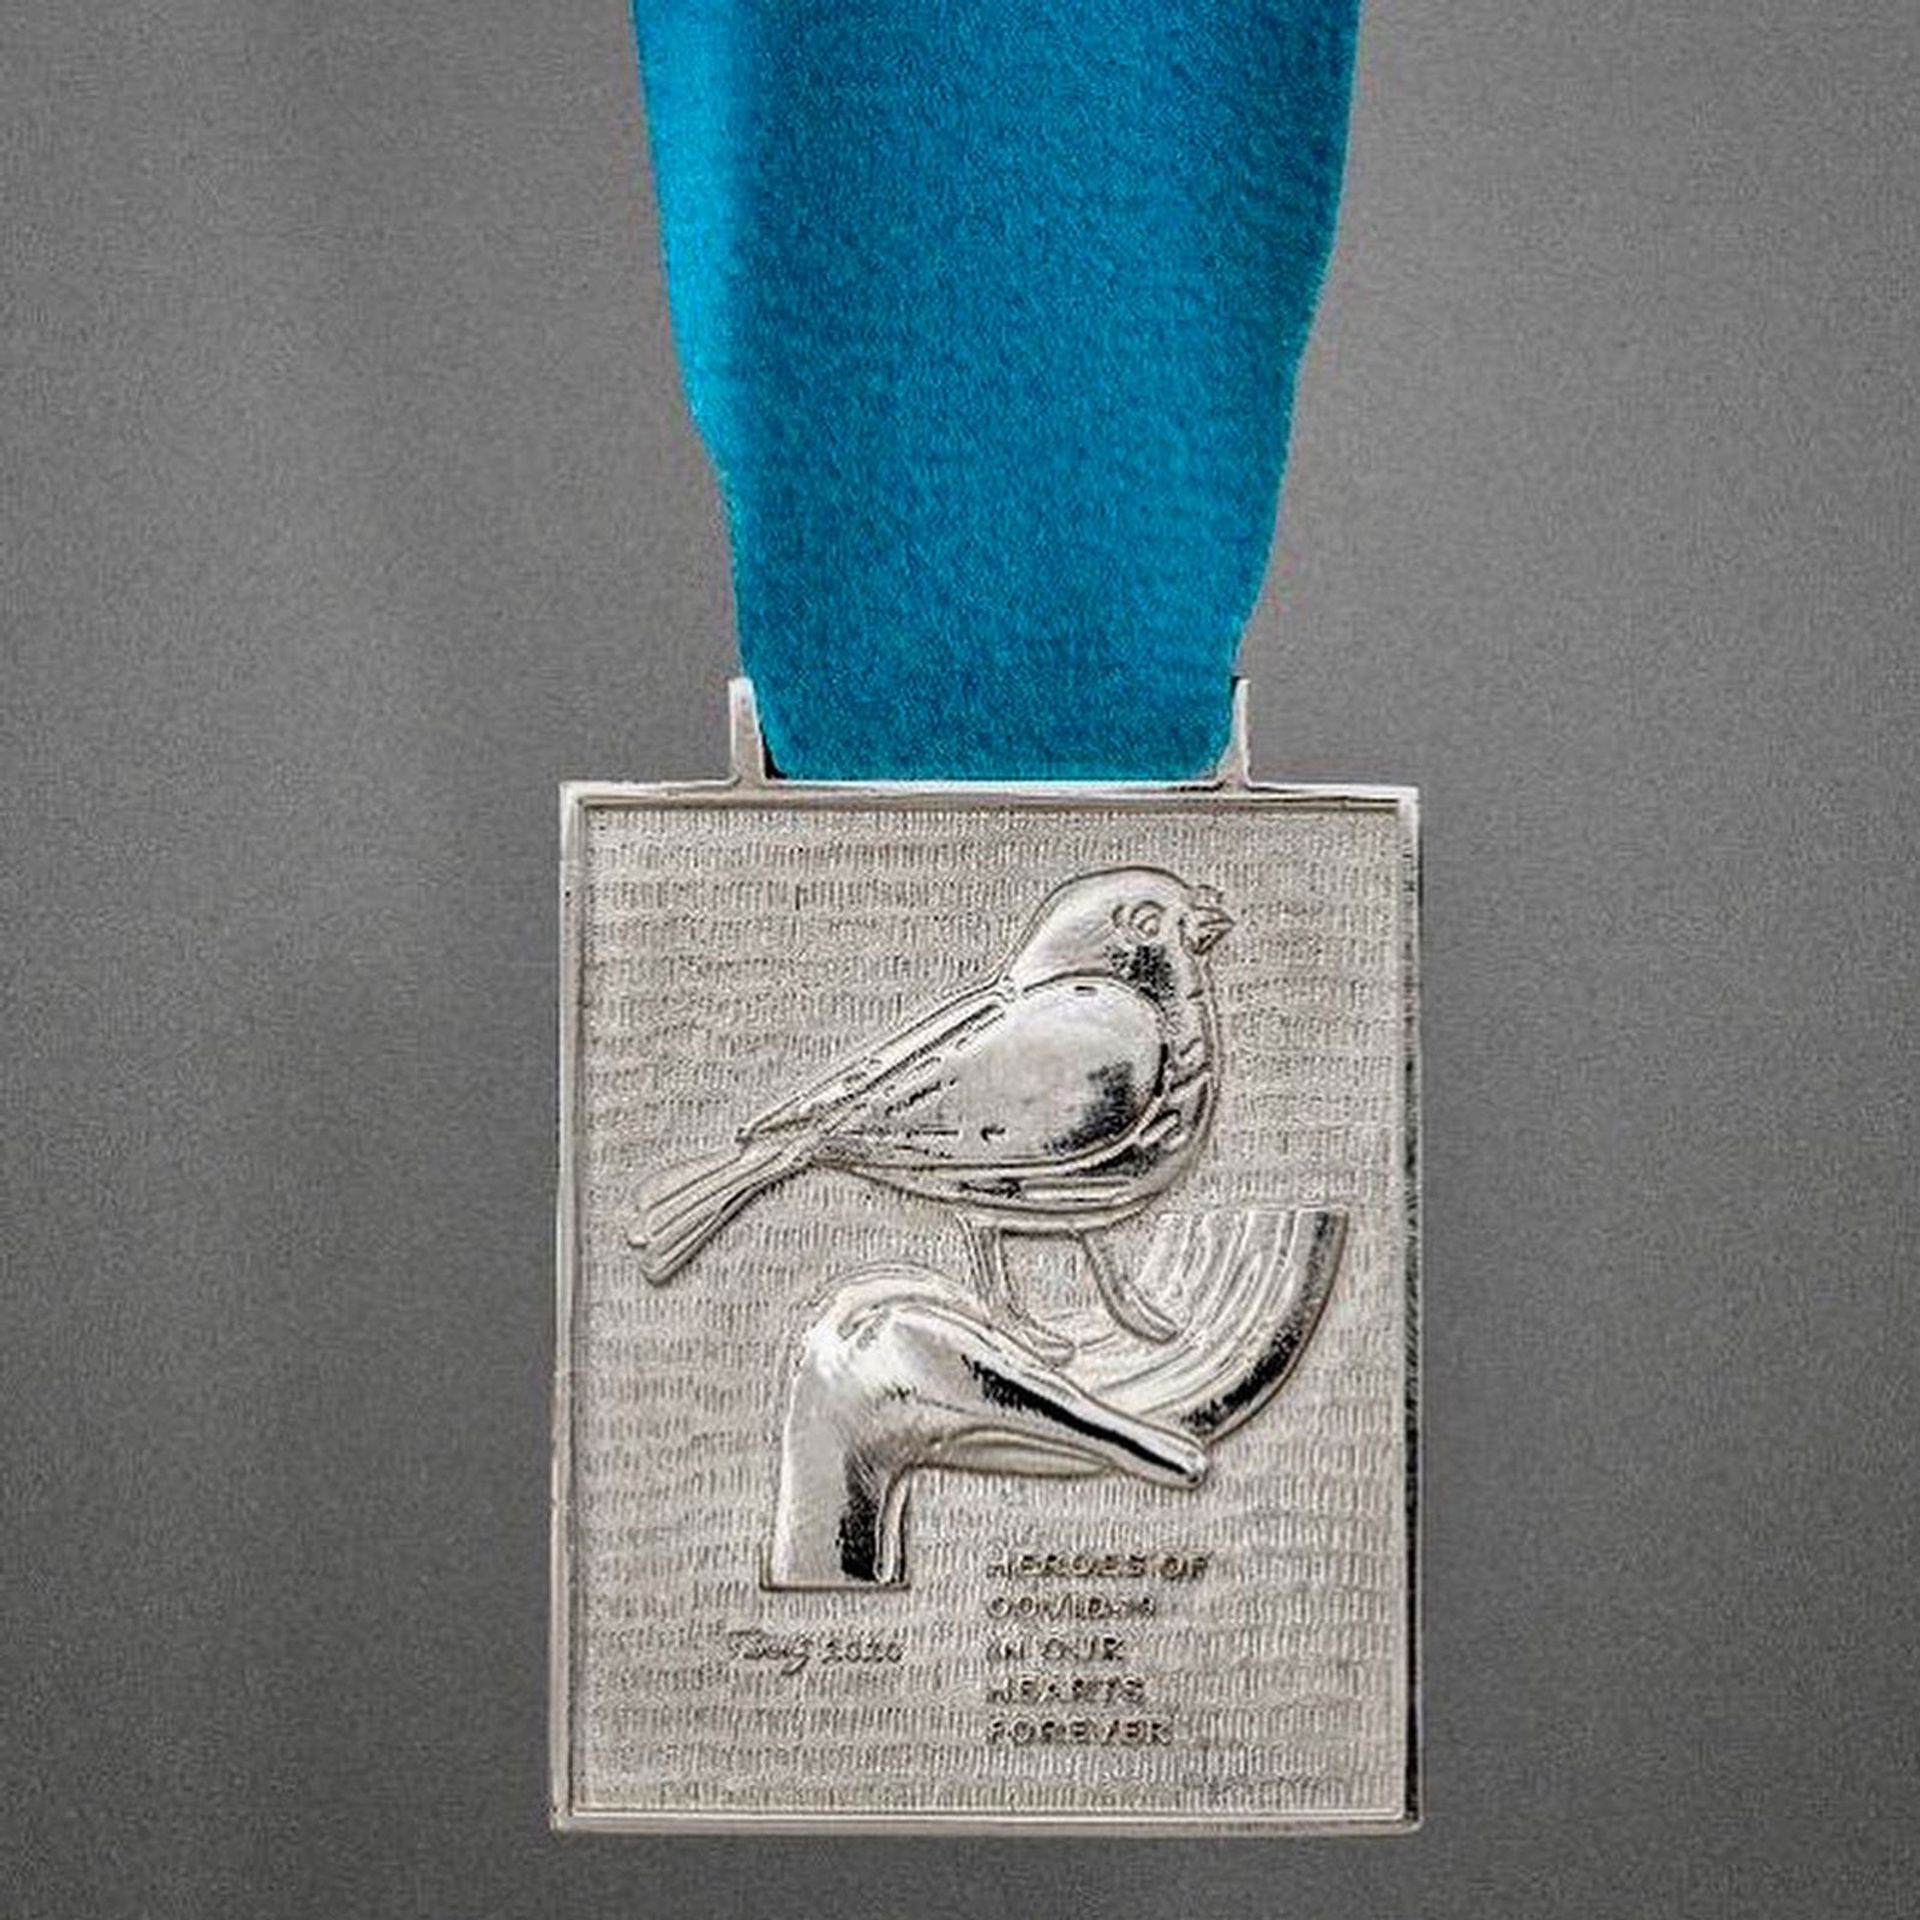 Parviz Tanavoli's medallion, which he is selling to help hospitals in Iran during the coronavirus pandemic 